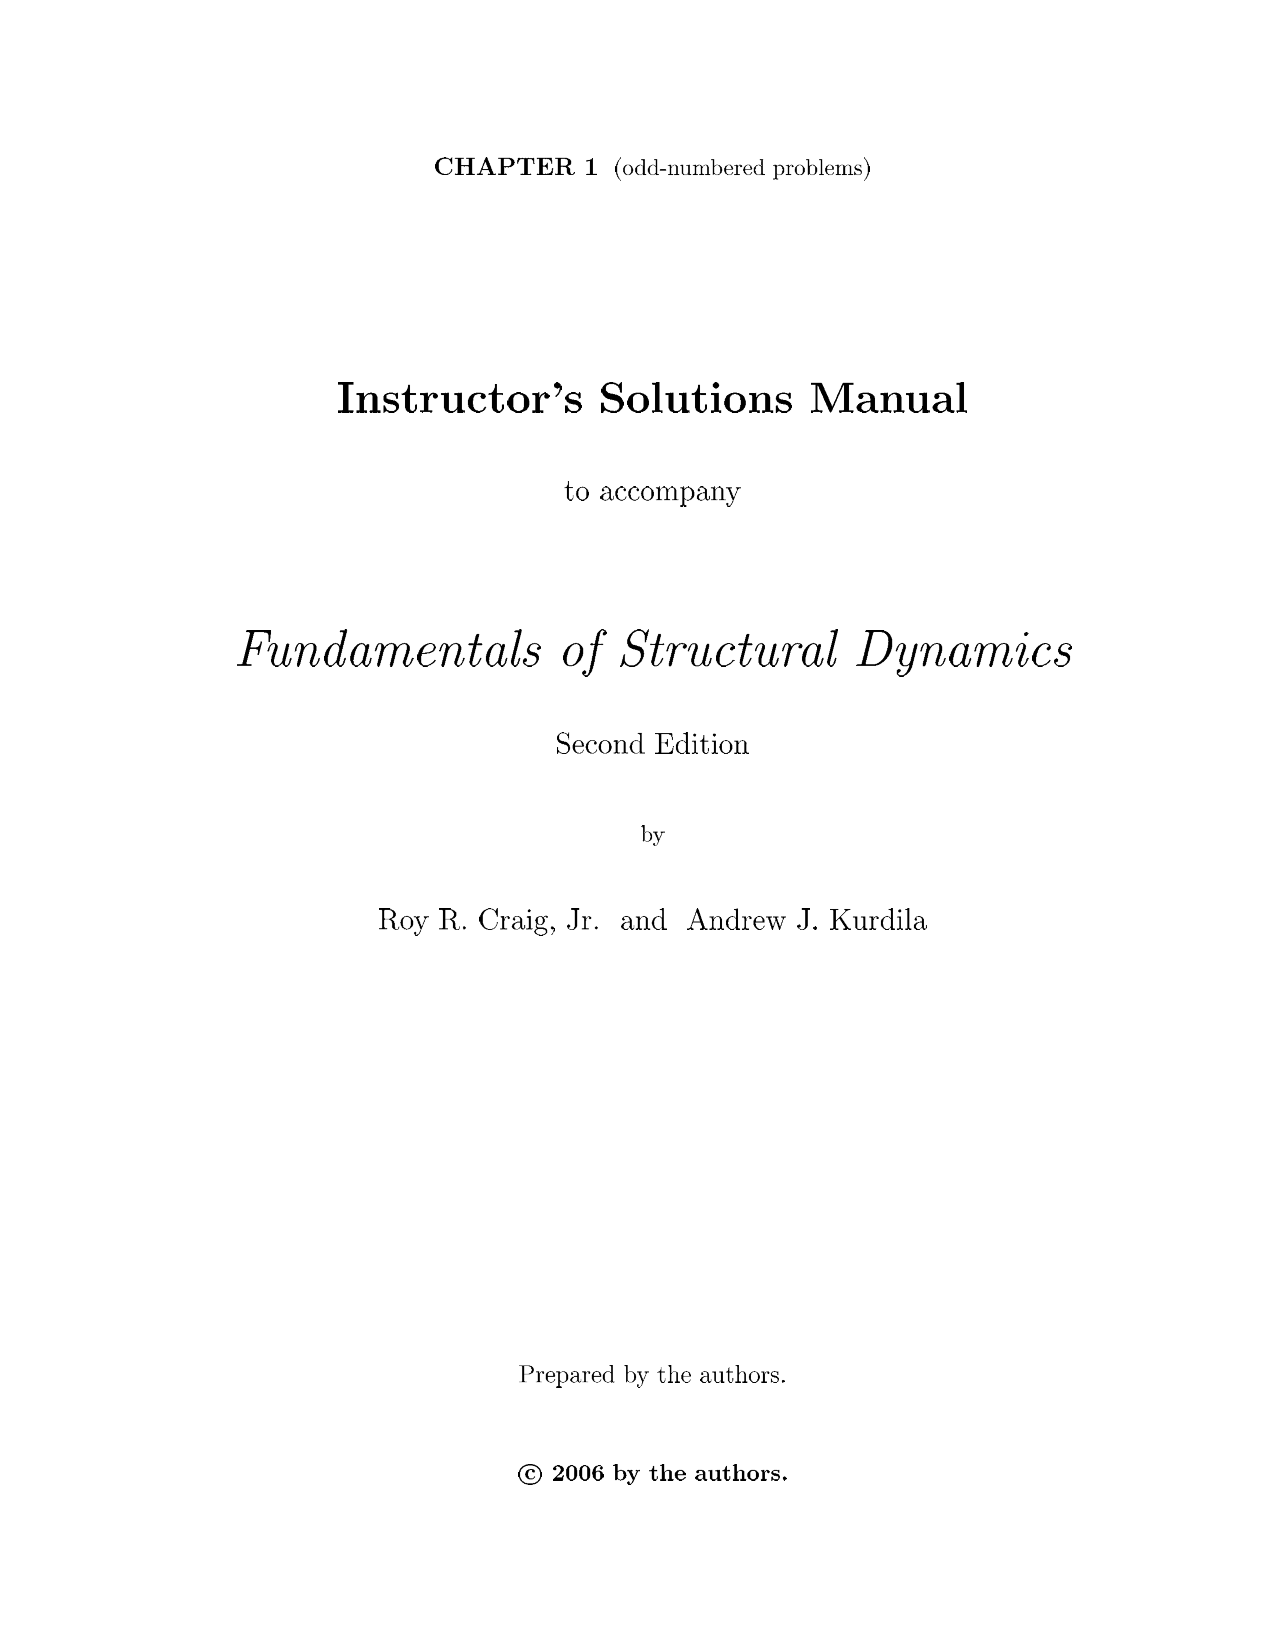 Download free Fundamentals of structural dynamics Roy Craig & Andrew Kurdila 2nd edition solution manual pdf | solutions